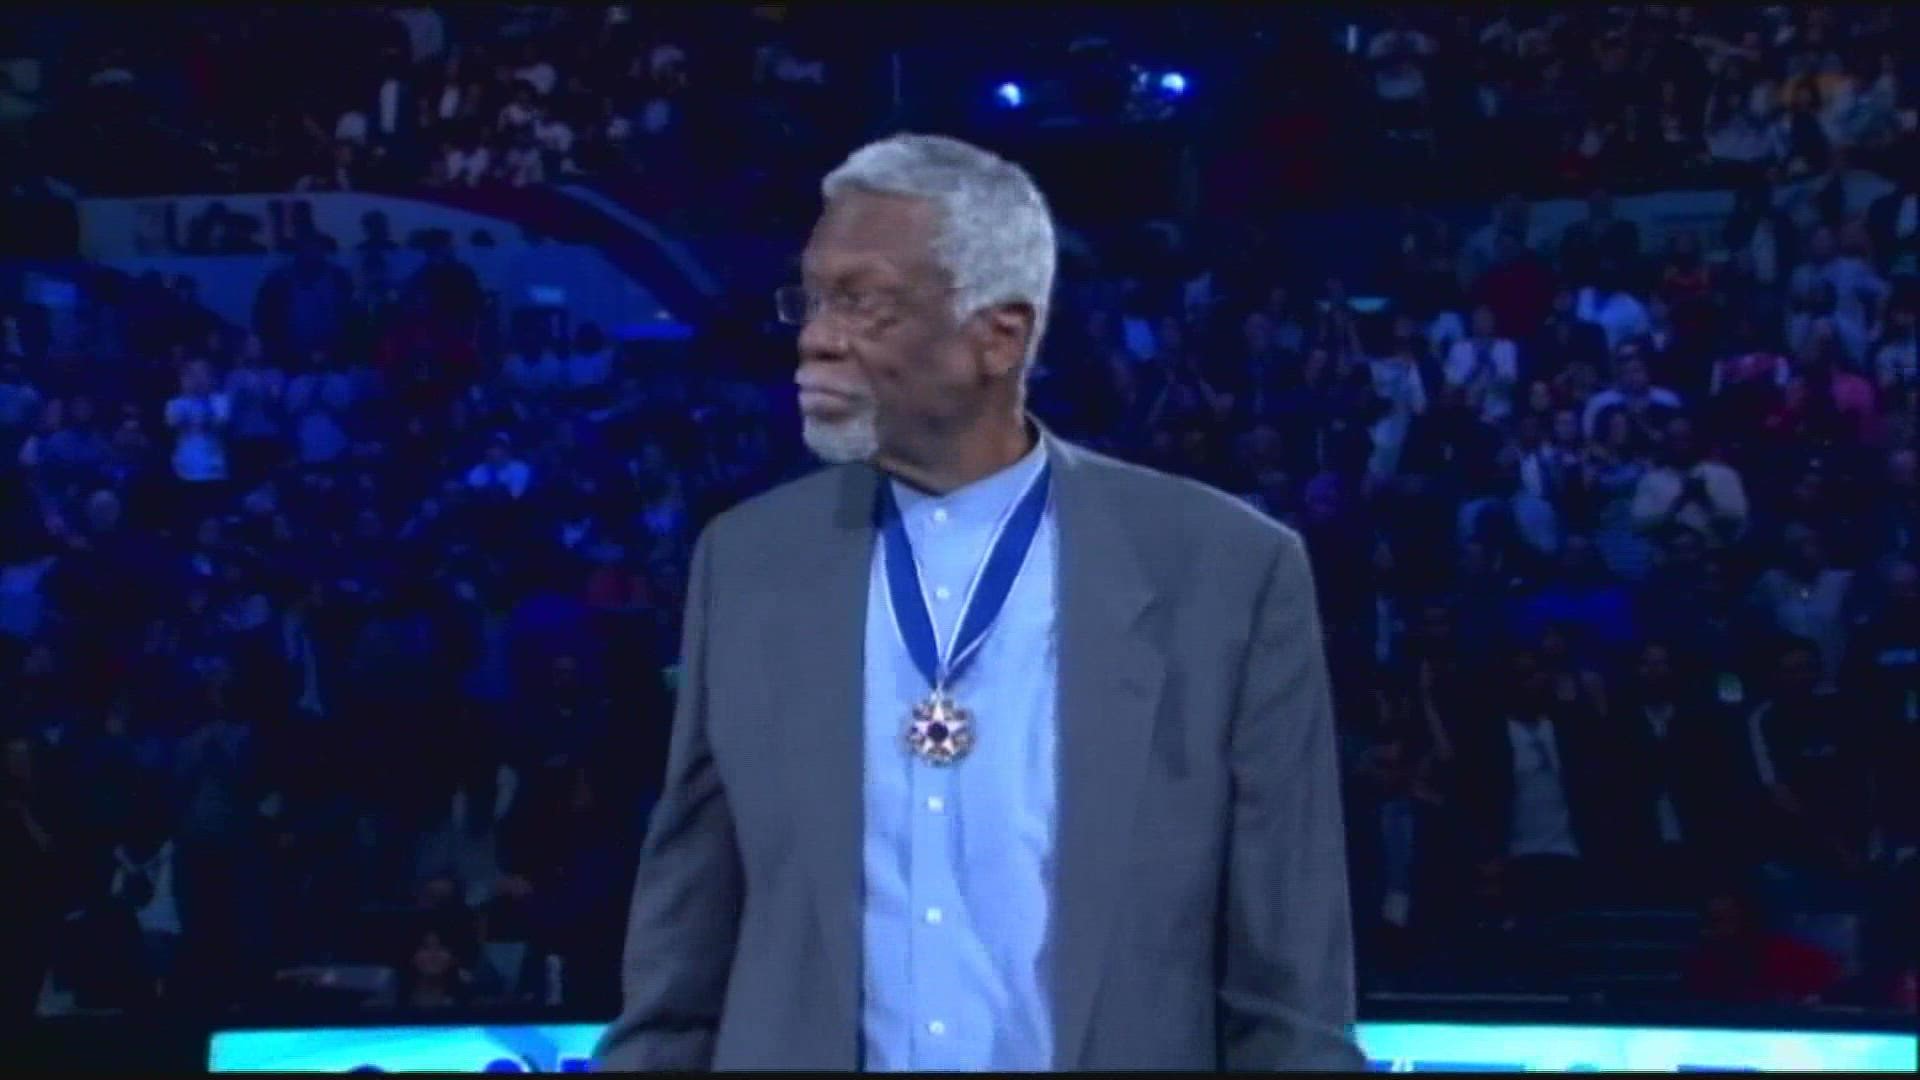 The NBA's First Black Coach, Legend Bill Russell, Has Died